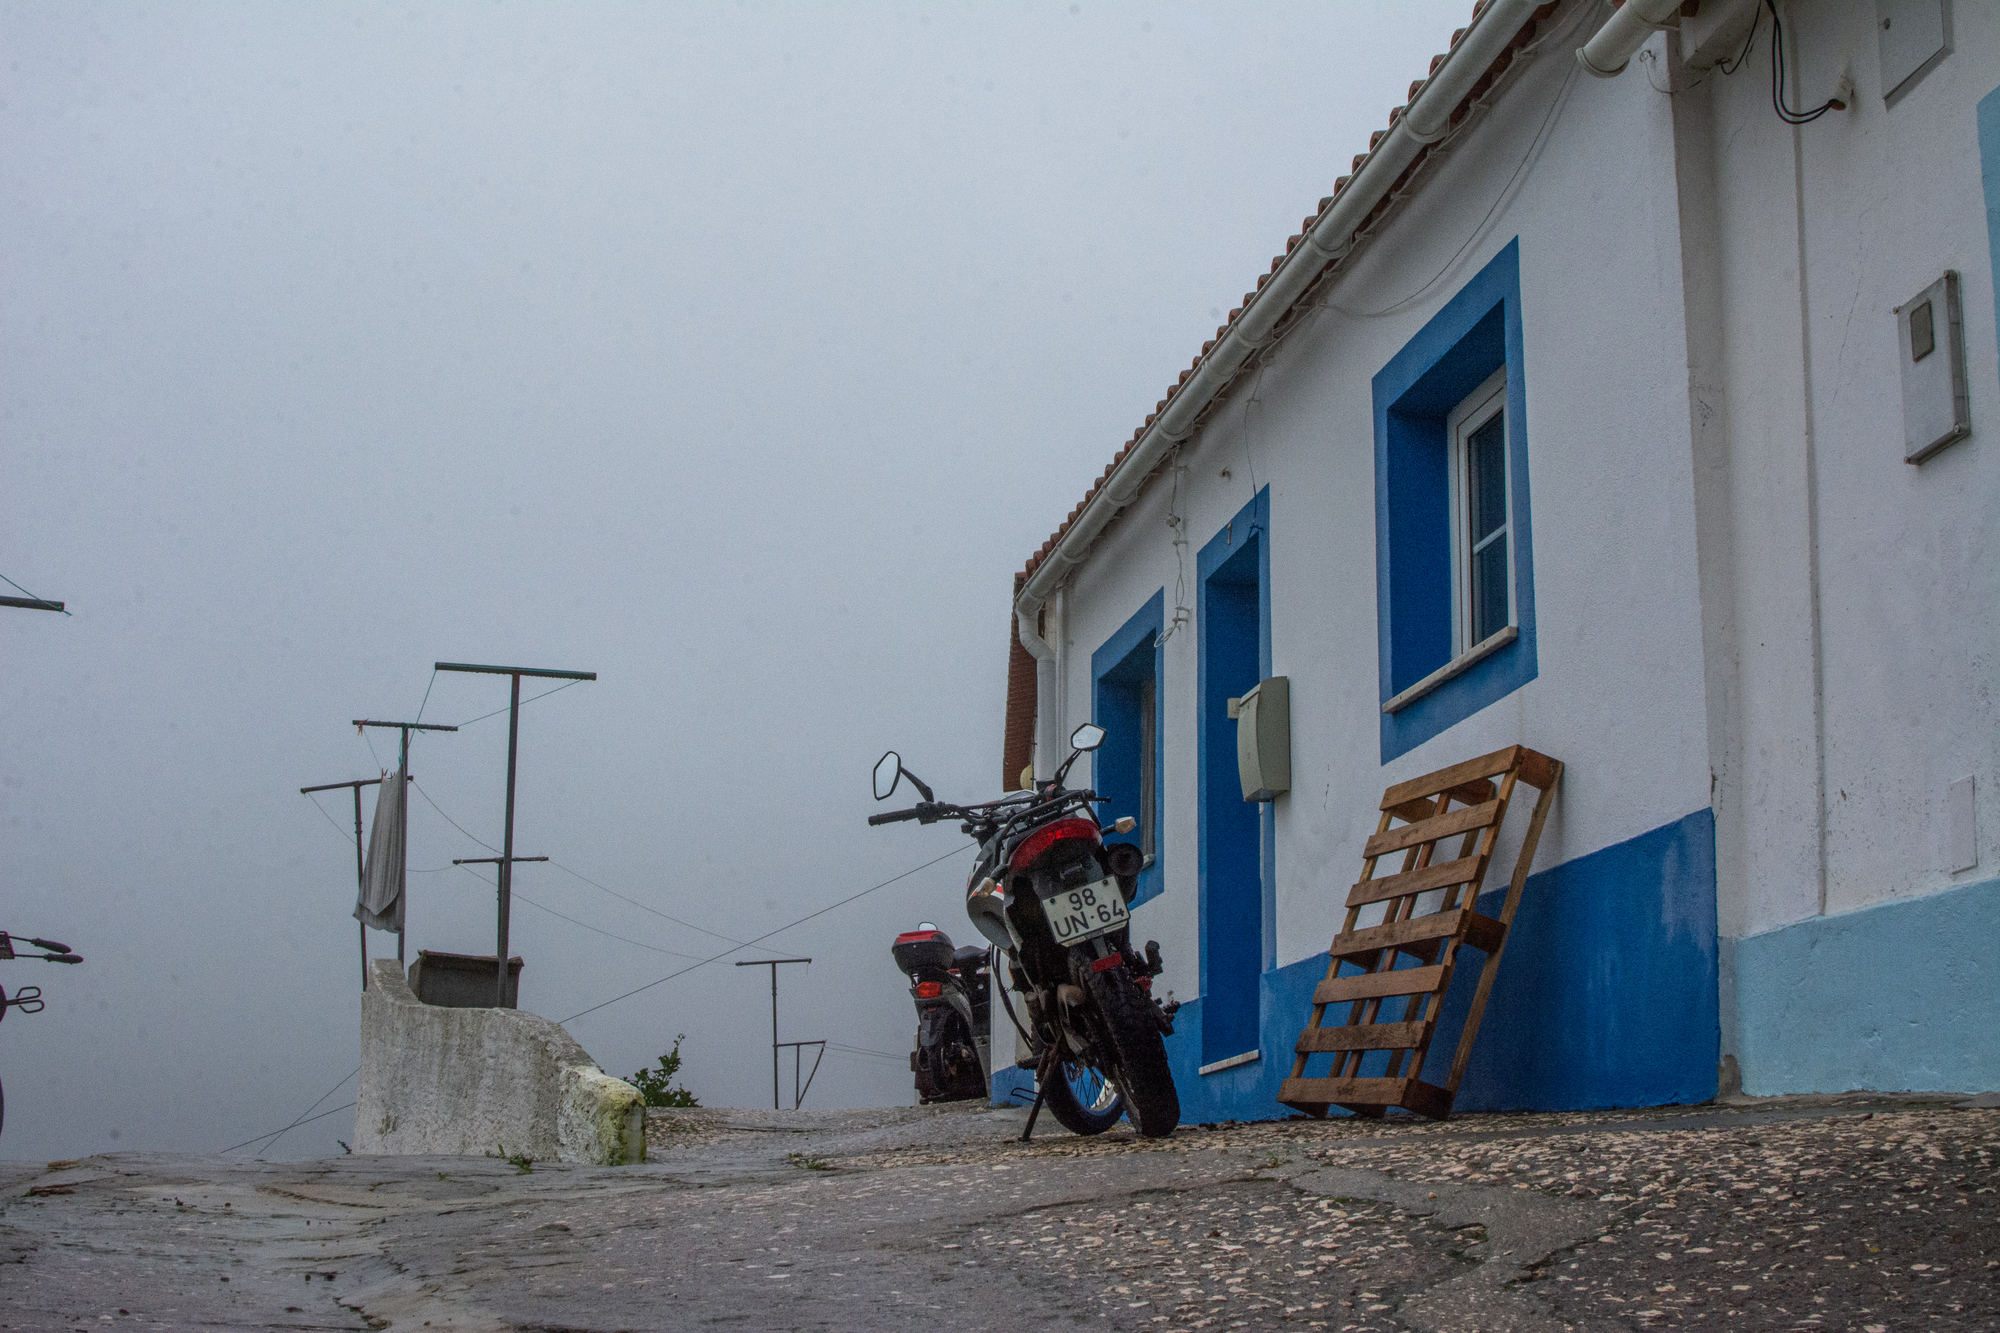 A parked motorcycle by a blue and white building on a cobblestone street in a misty and overcast setting.